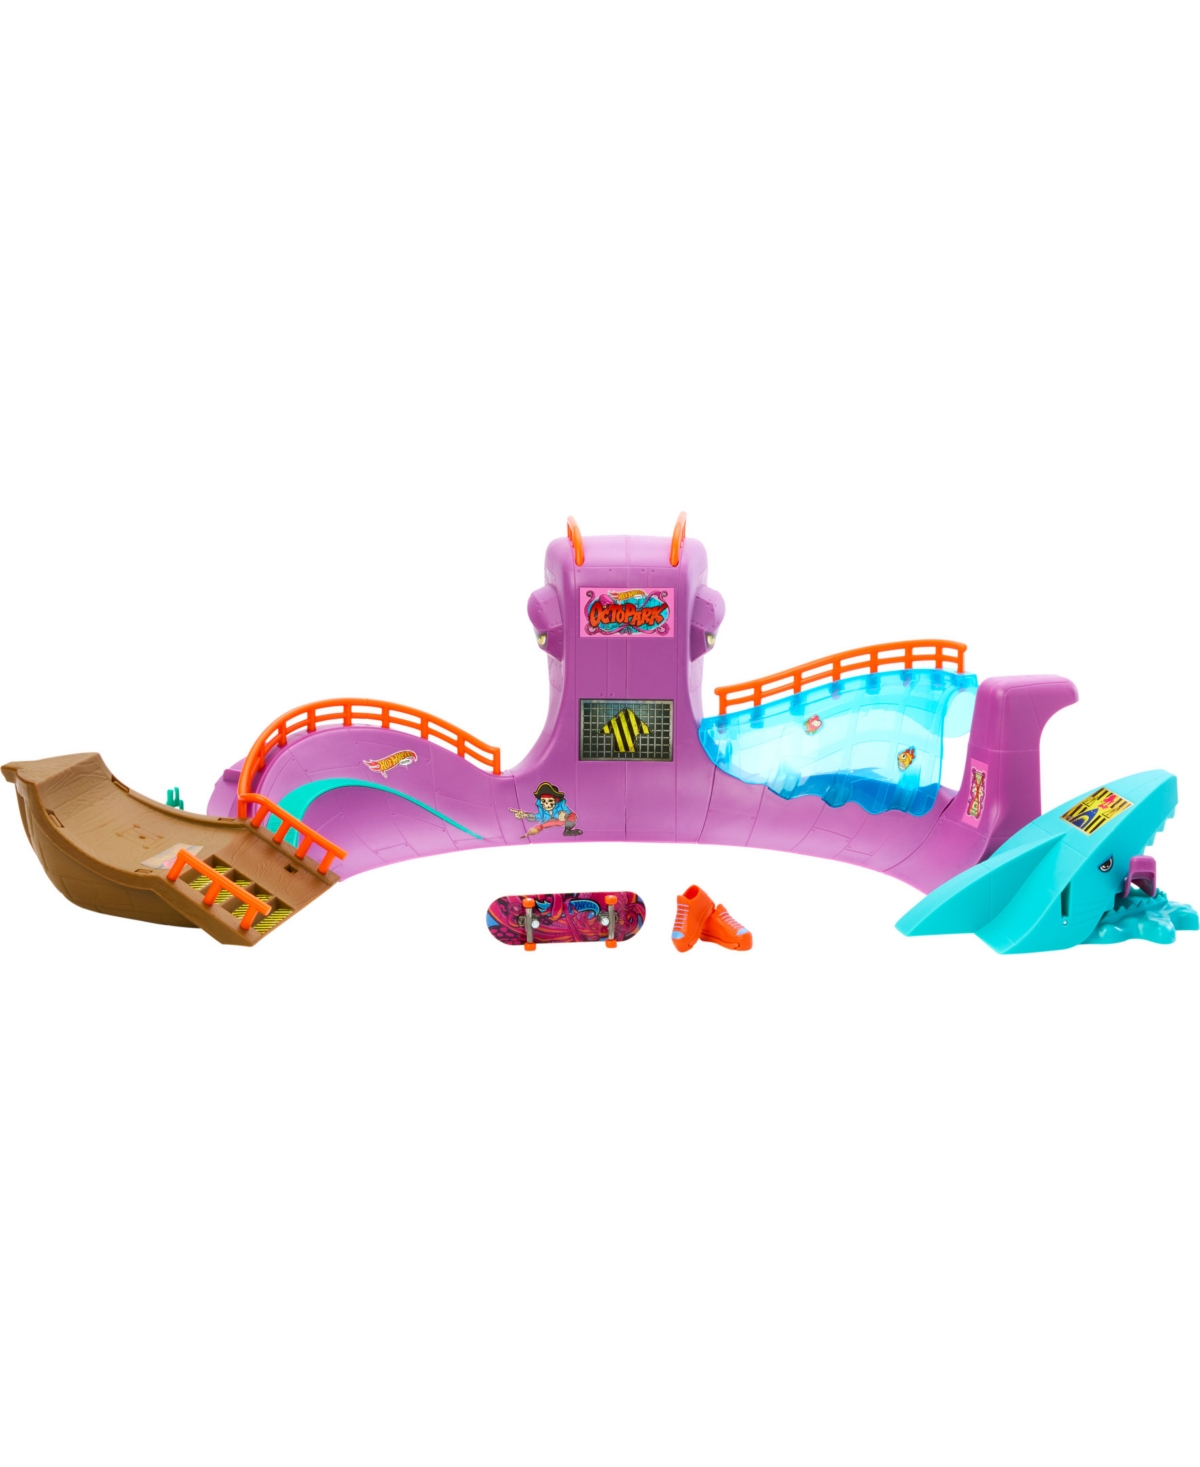 Hot Wheels Kids' Skate Octopark Playset, With Exclusive Fingerboard And Skate Shoes In Multi-color